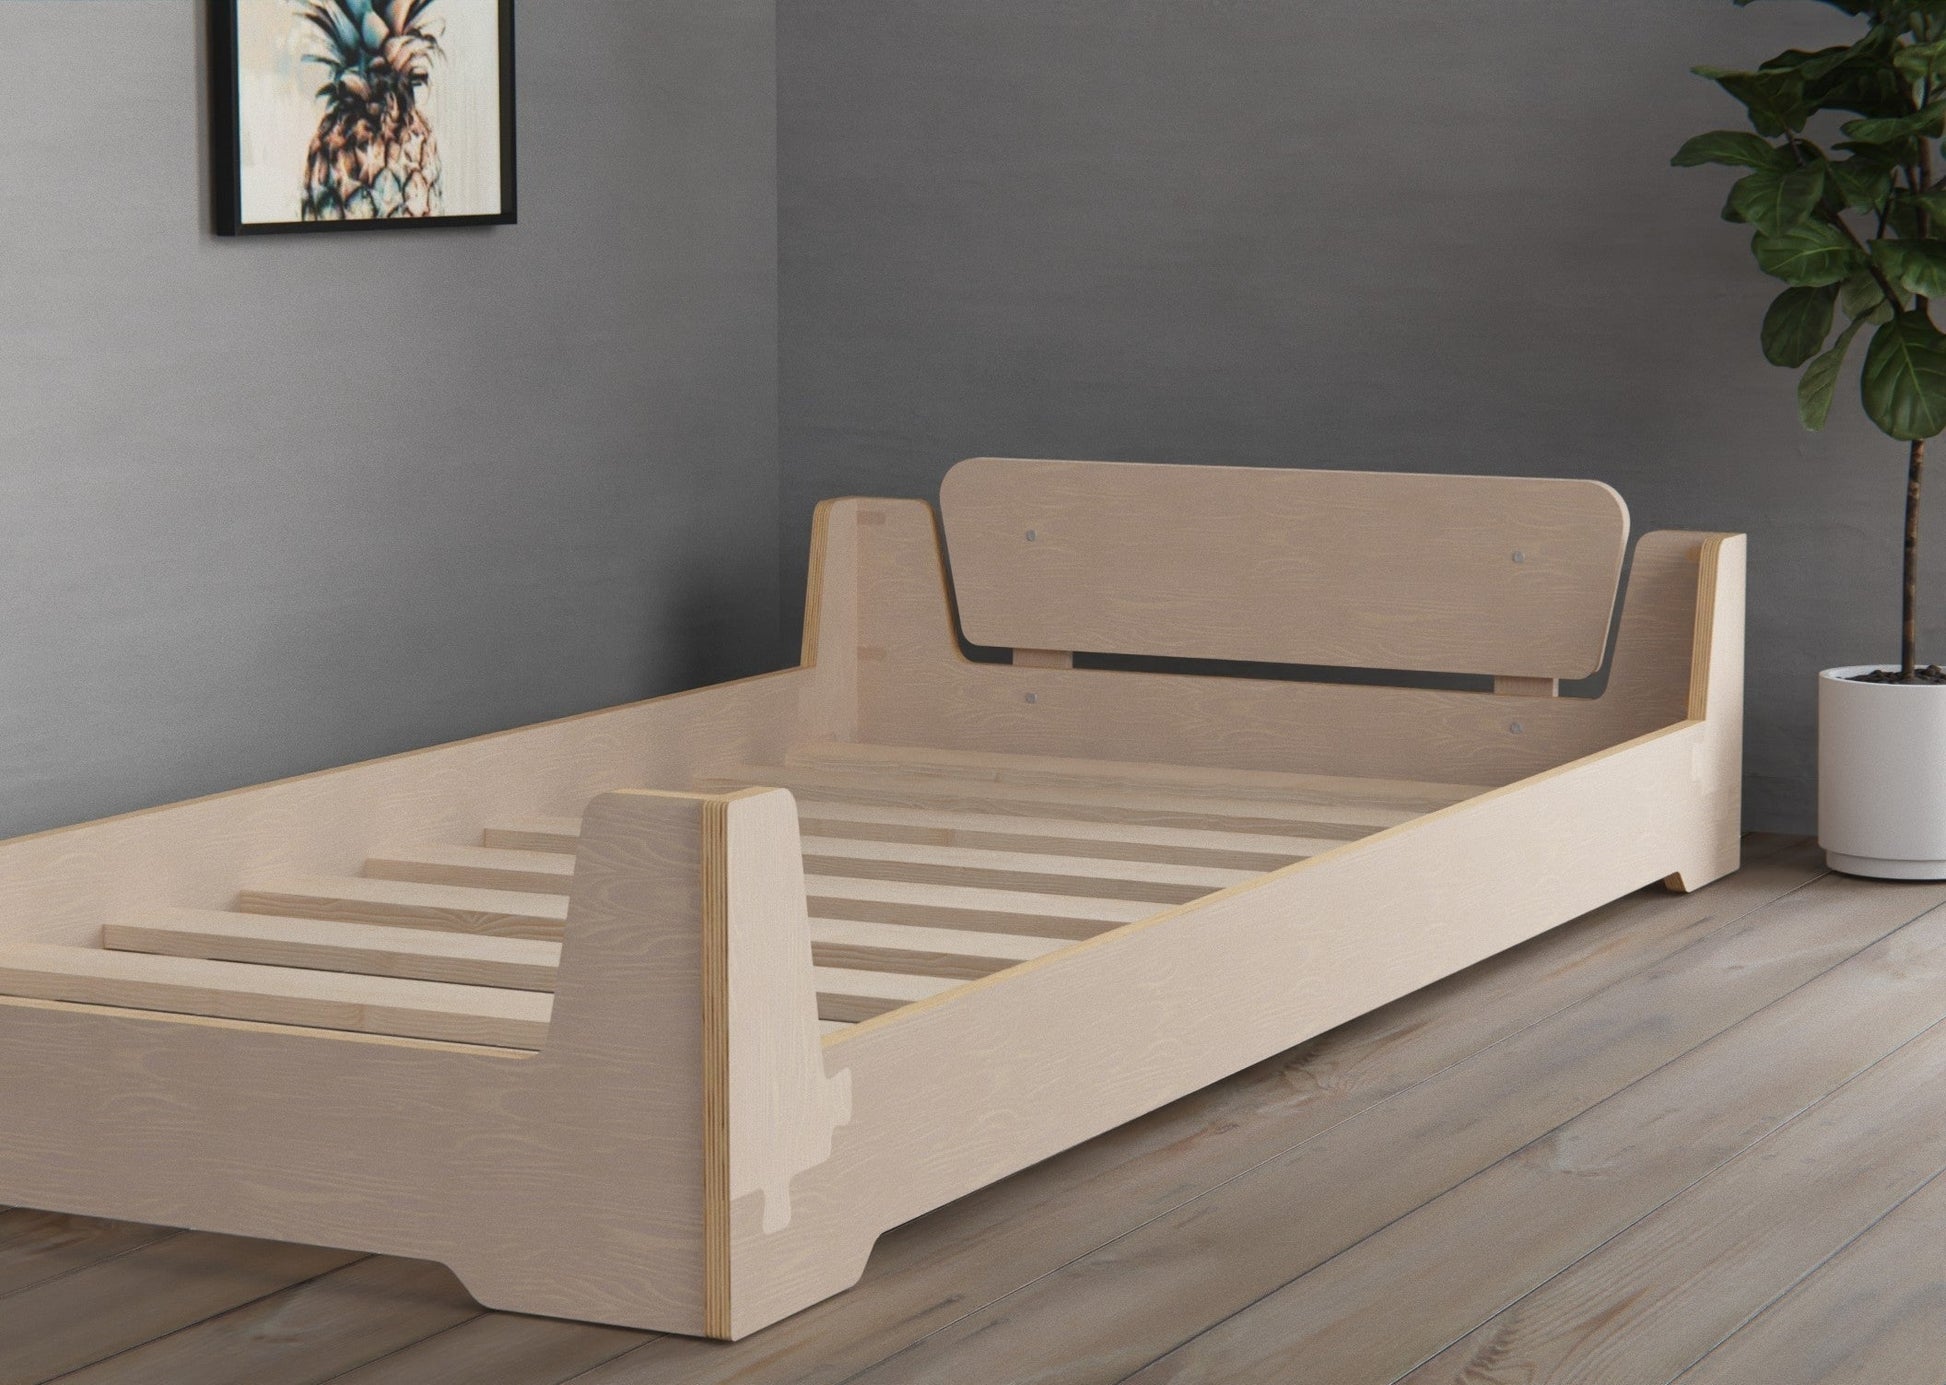 Experience the adaptability of our flippable kids bed frame, designed with the Montessori method in mind. Begin low for toddler convenience, flip it to a regular floor bed as your child matures. Choose the optional spacious drawer for additional storage.